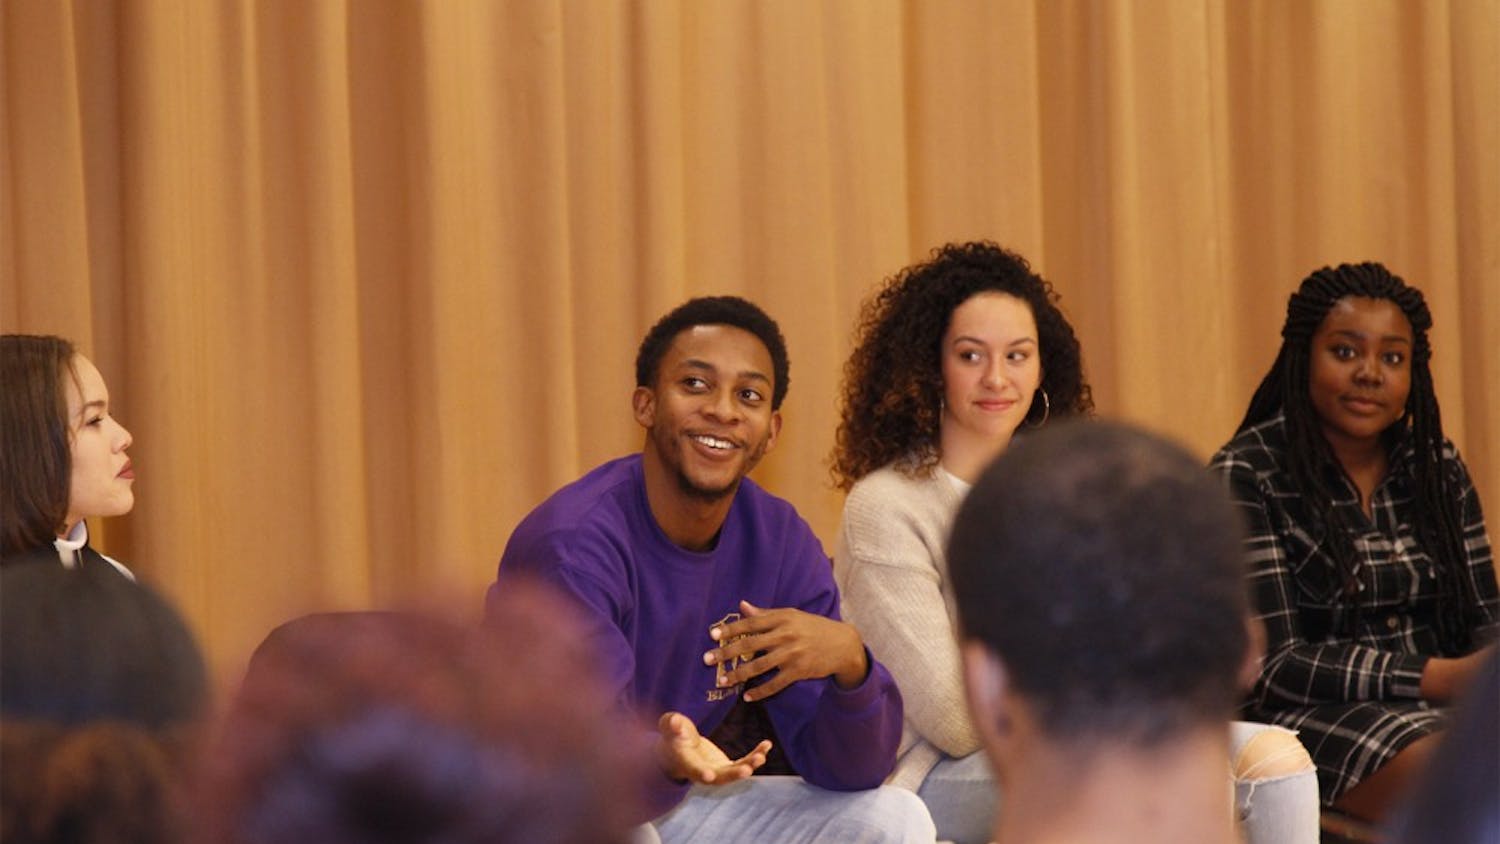 Senior Management & Society major Alex Neal joins four other panelists at a seminar organized by the Black Student Movement, called "The Double Standard", where they discussed interpersonal relationships, slut-shaming, and fidelity in monogamous relationships.